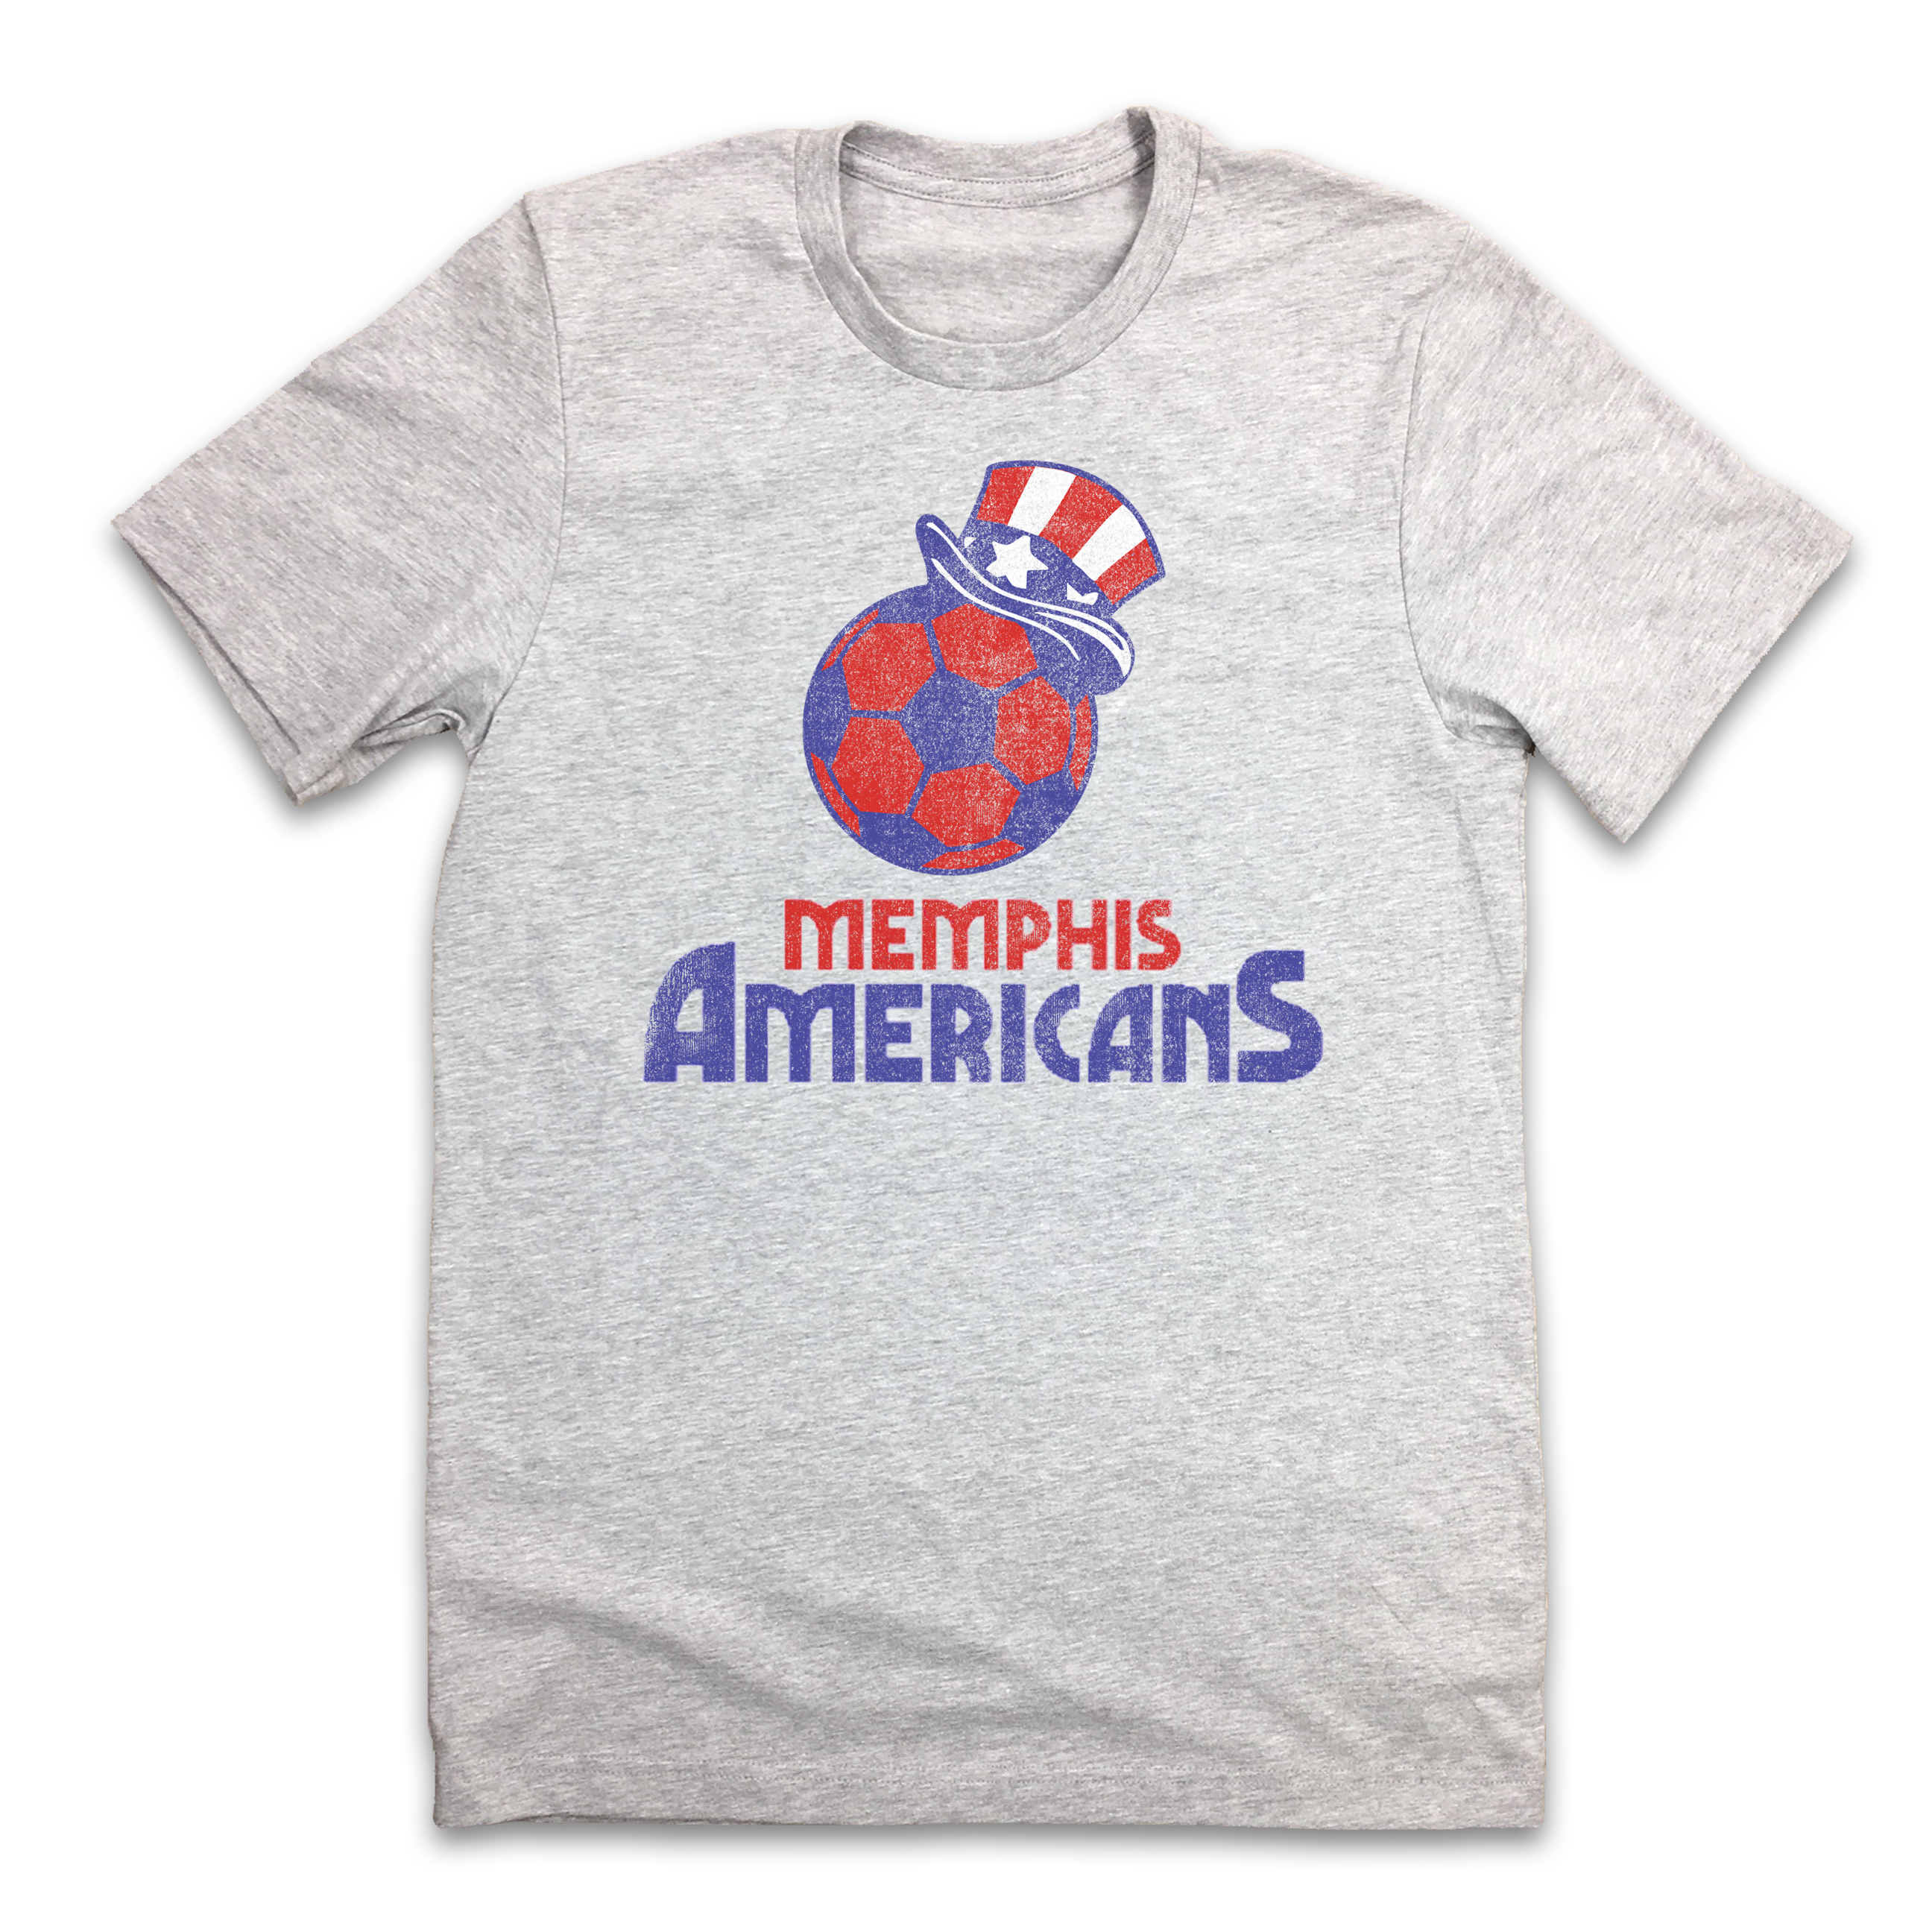 Memphis Americans - Indoor Soccer - Old School Shirts- Retro Sports T Shirts